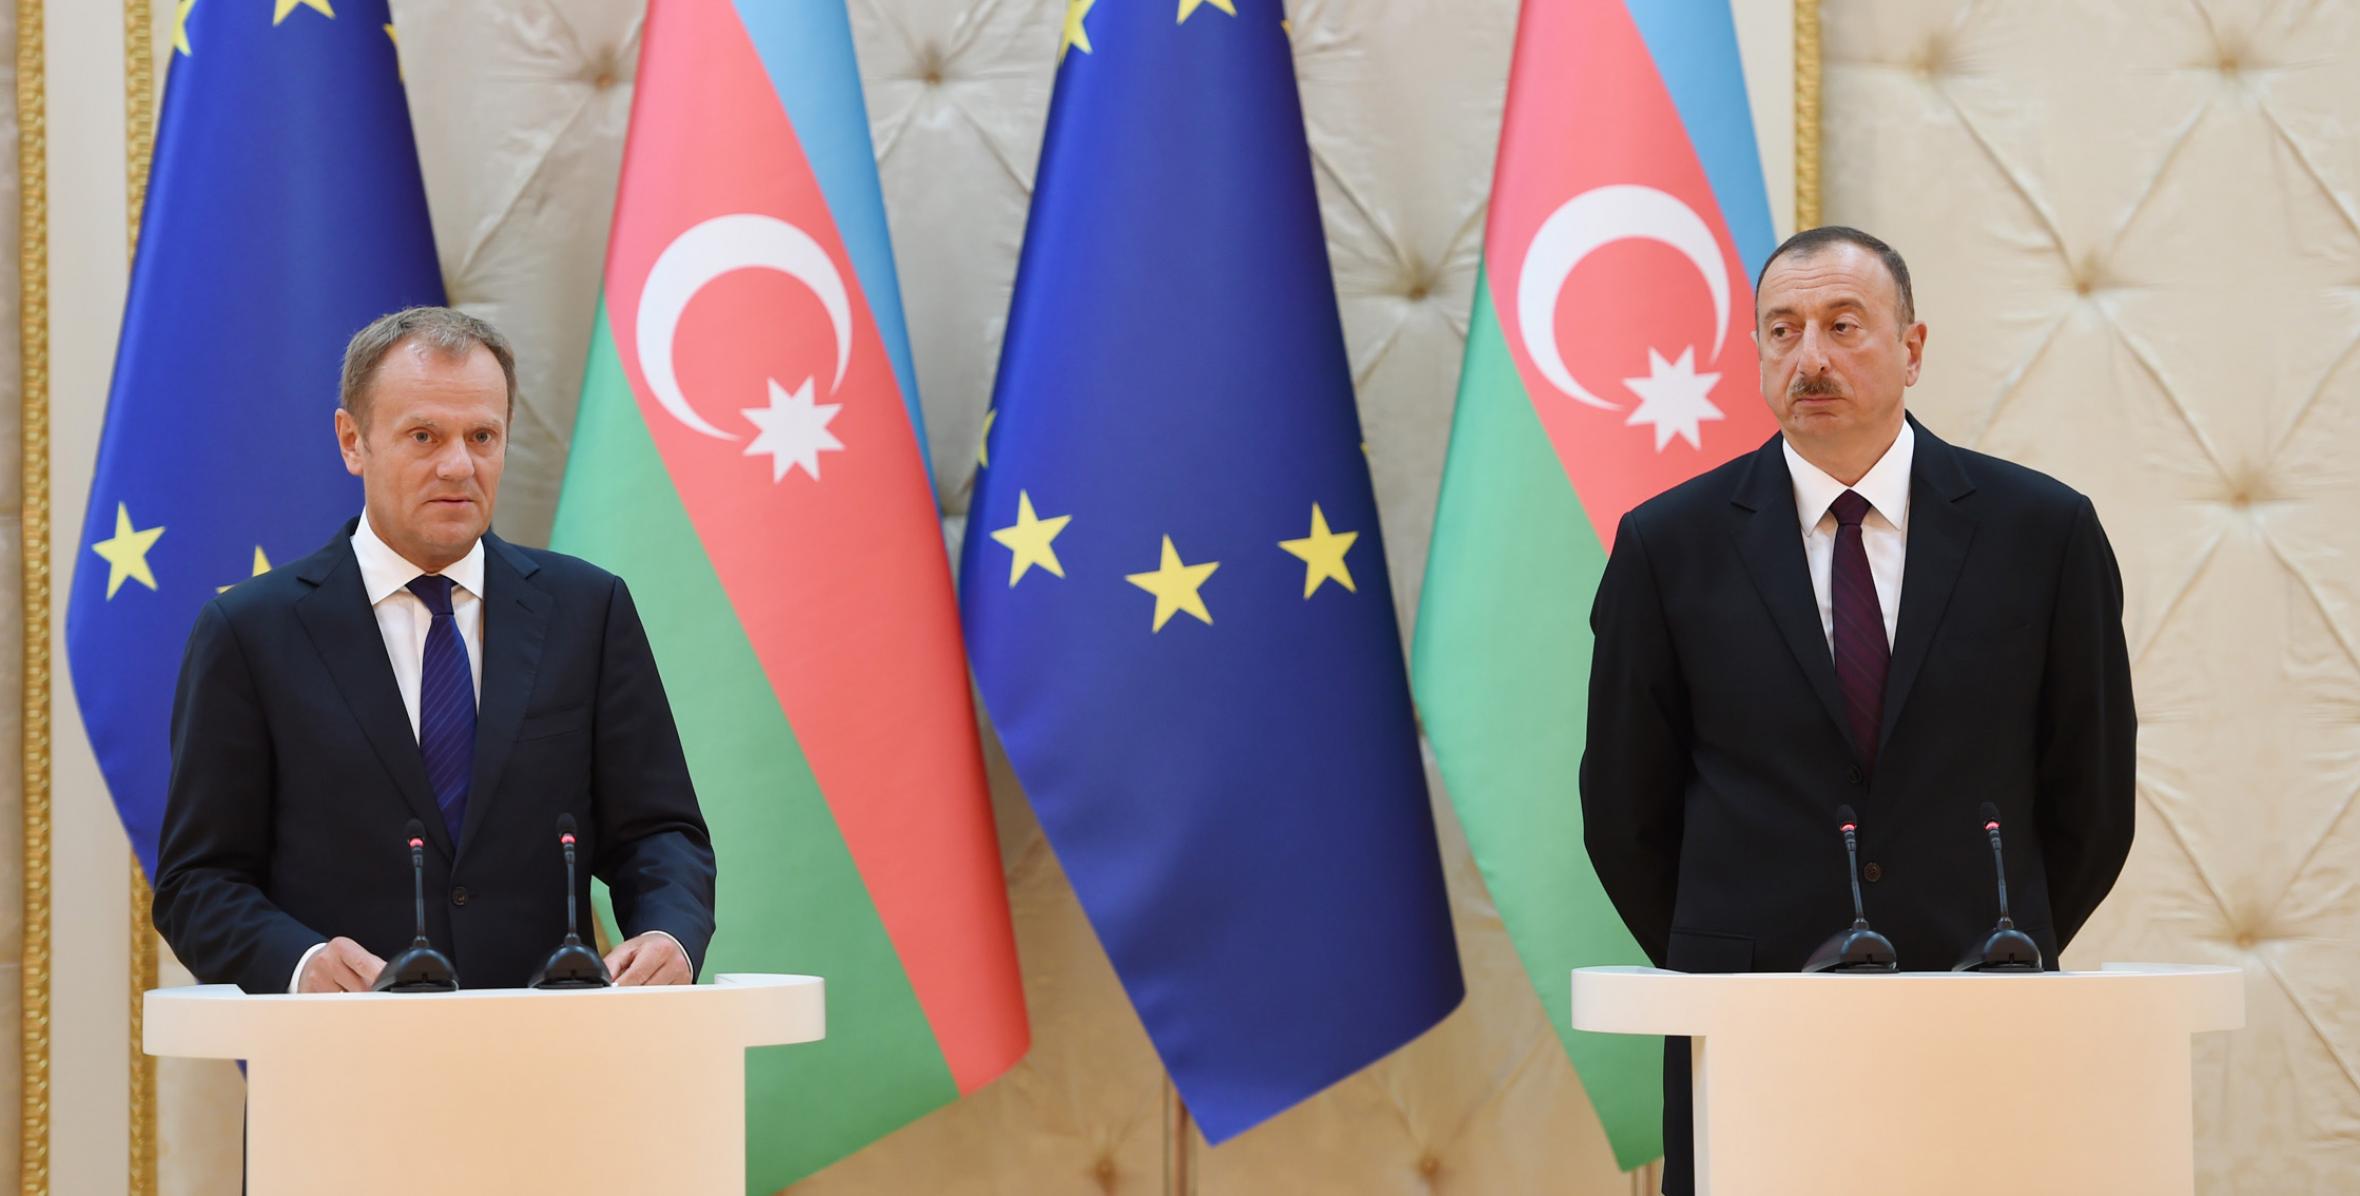 Ilham Aliyev and President of the European Council Donald Tusk made statements for the press